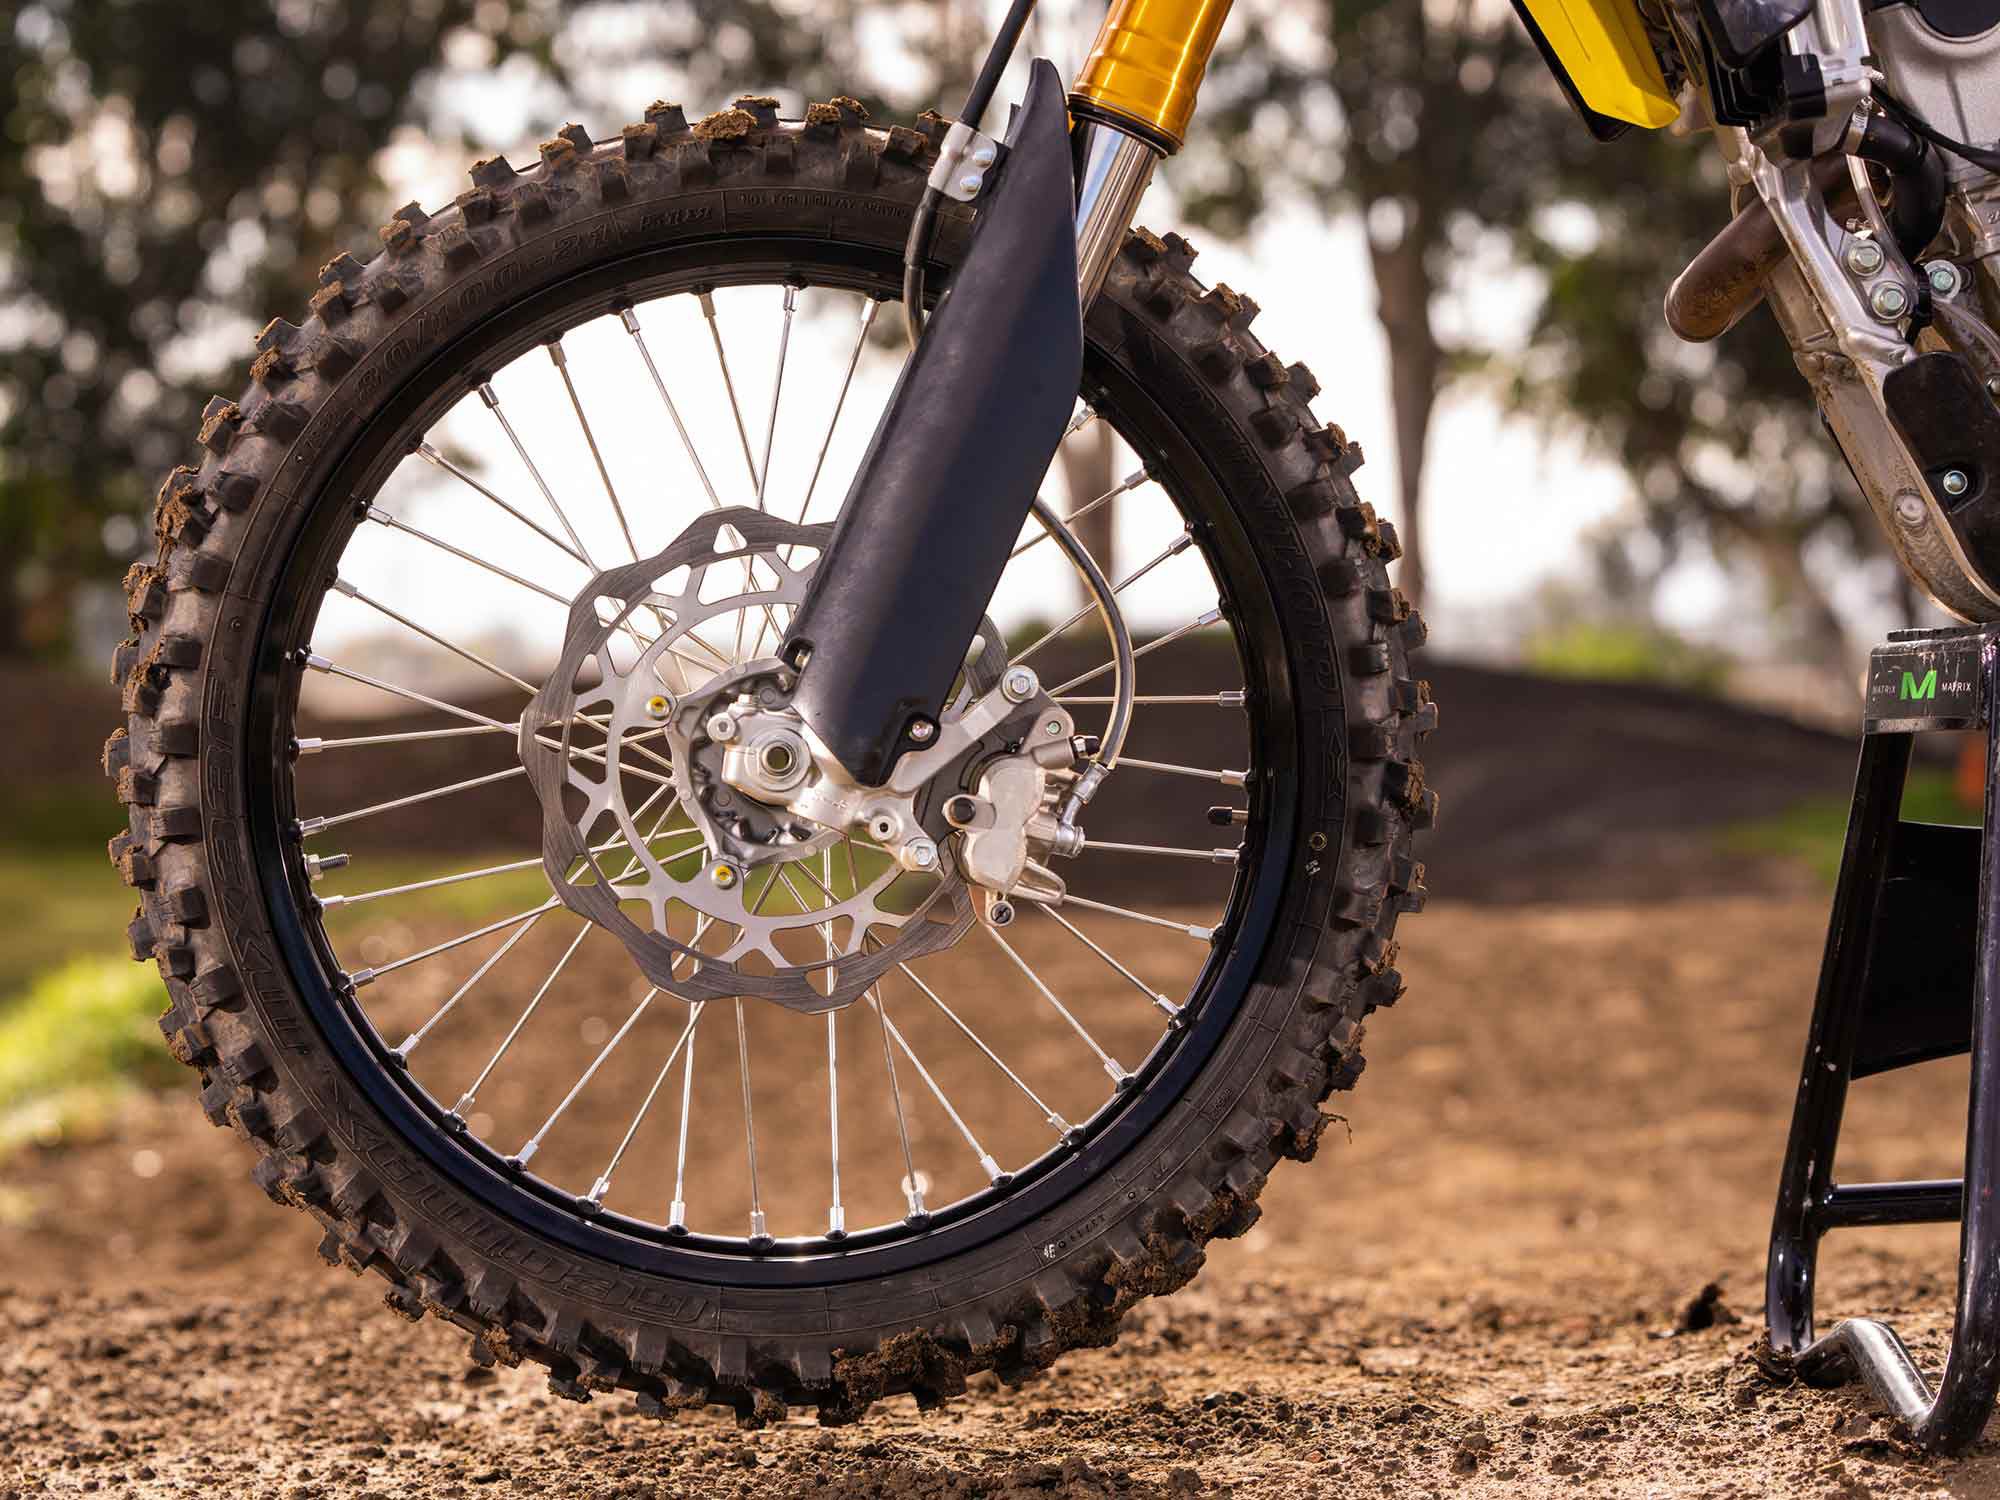 In standard dirt bike form, the RM-Z rolls on a 21-inch front spoked wheel. The front brake offers pleasing stopping power but we wish it had a more aggressive pad compound.